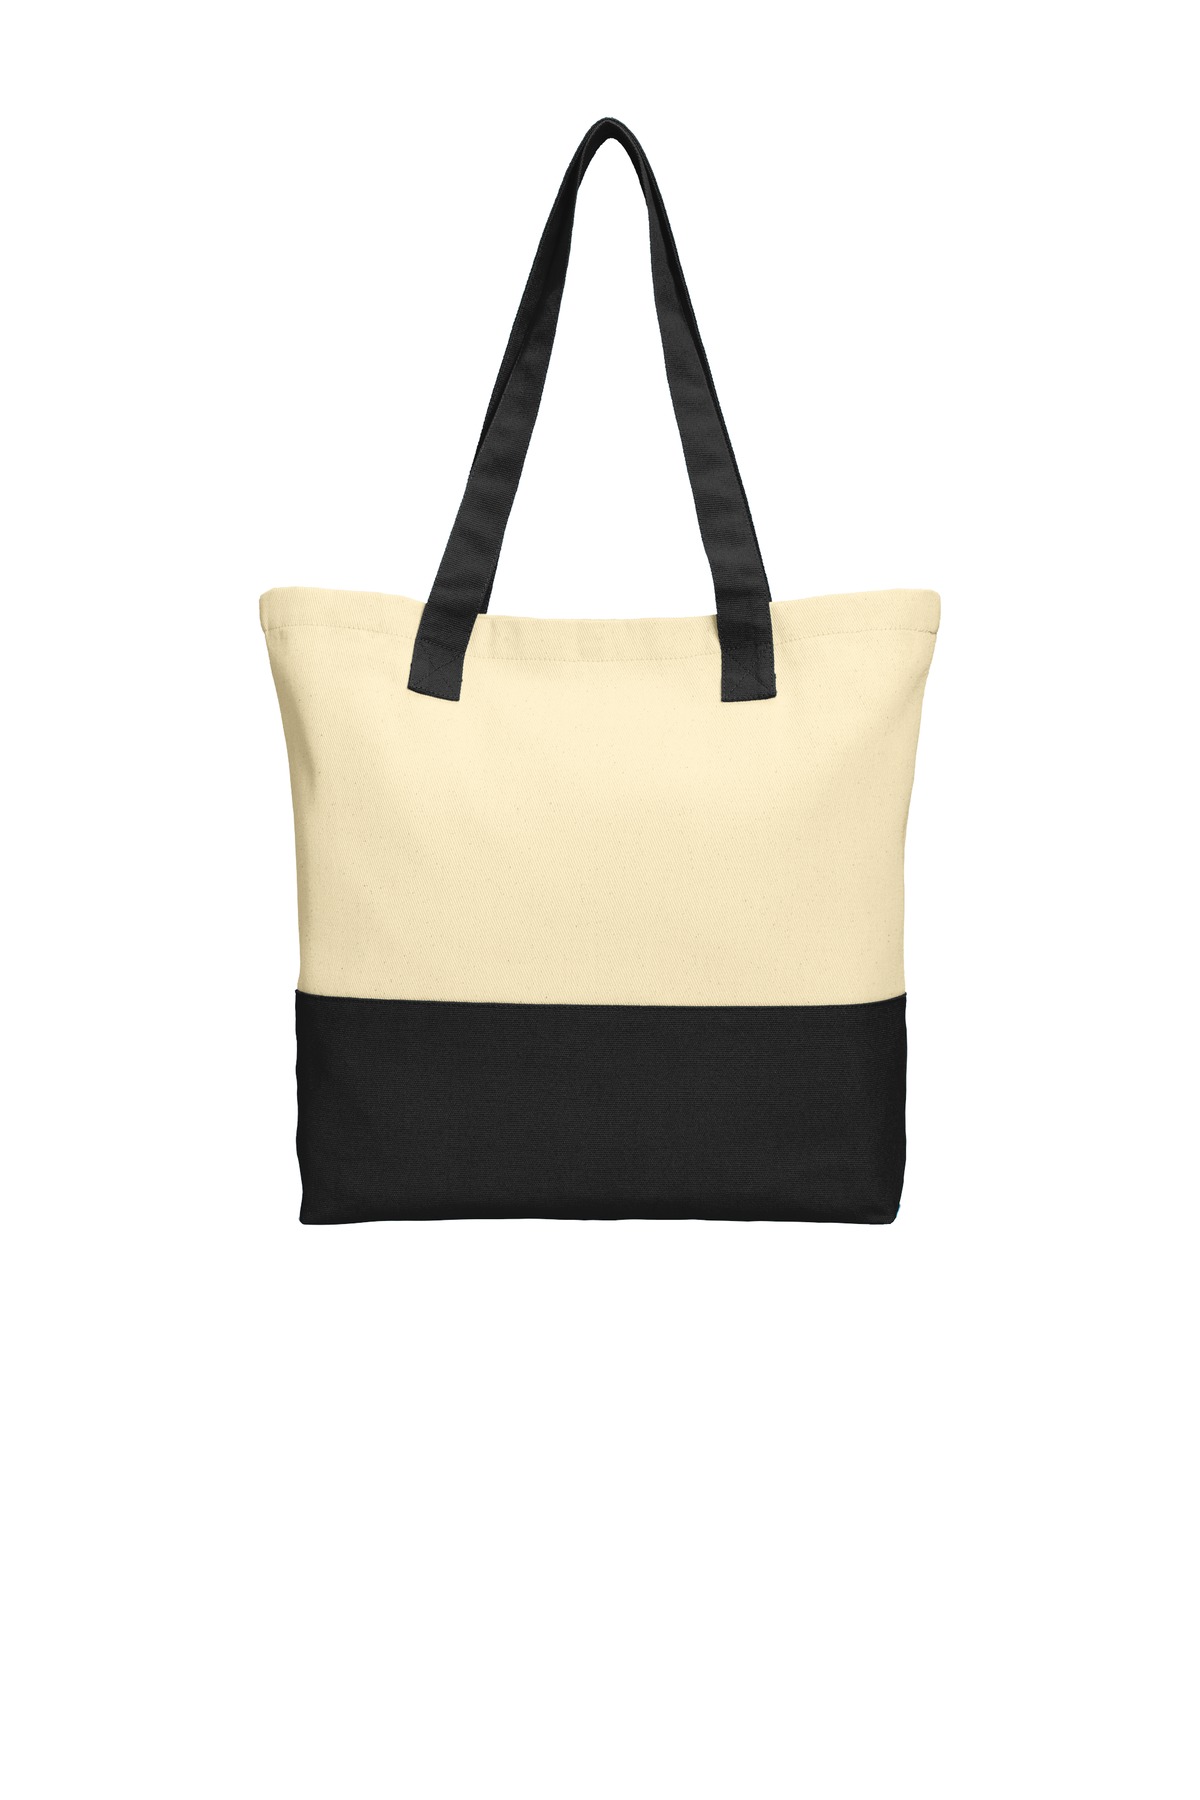 Port Authority Hospitality Bags ® Colorblock Cotton Tote.-Port Authority